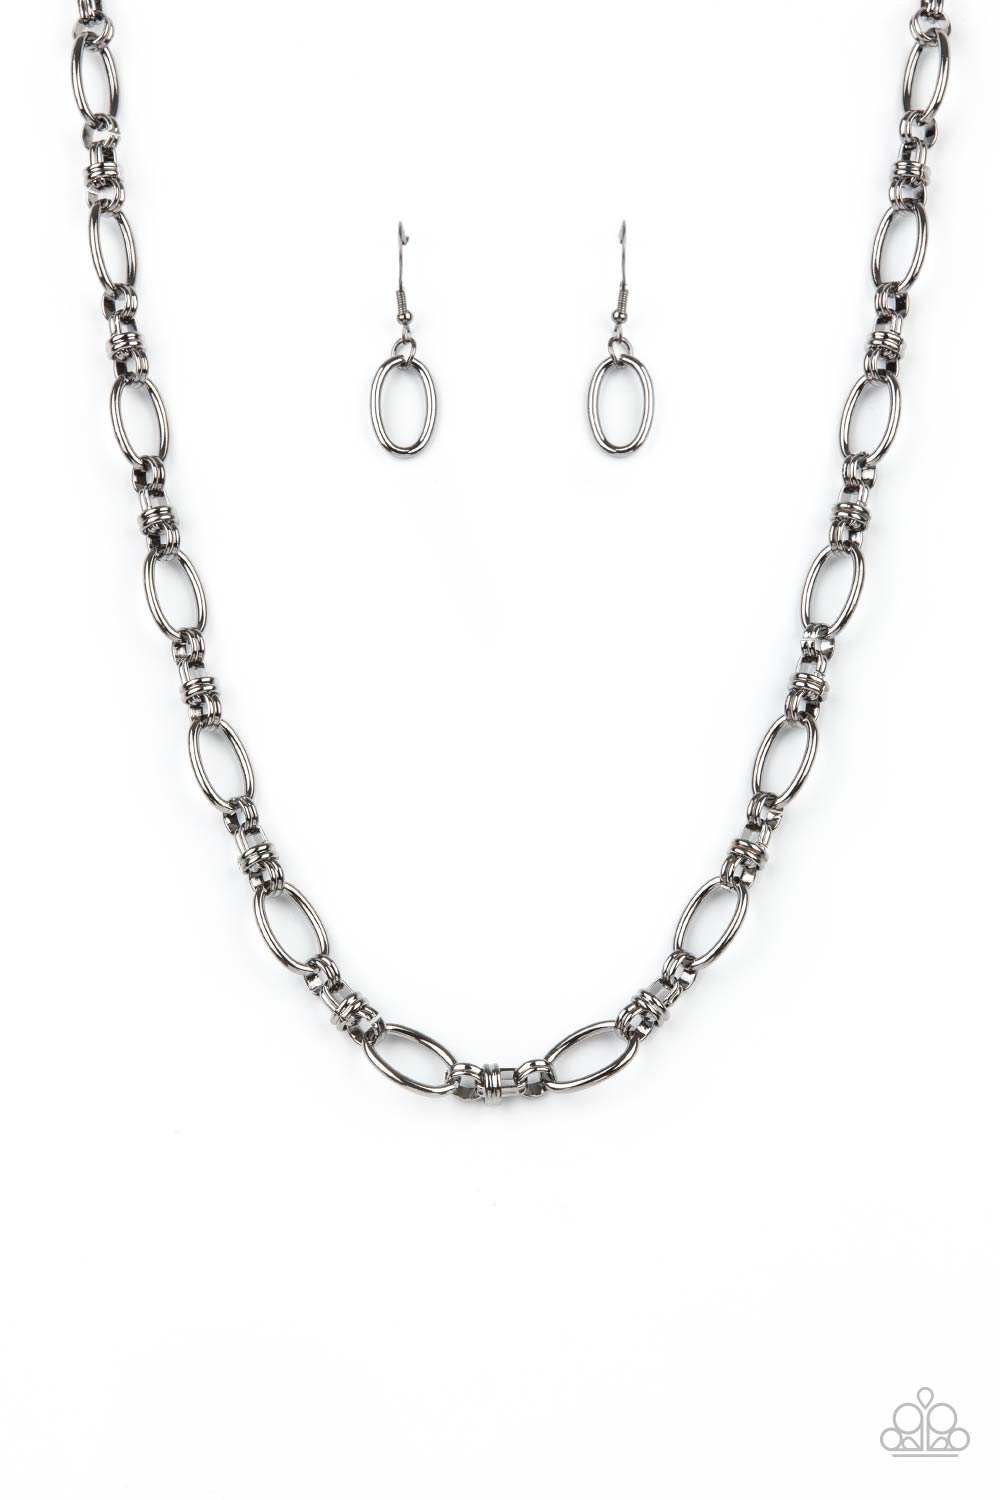 Defined Drama - Black Link - Gunmetal Fashion Necklace - Paparazzi Accessories - Gunmetal links connect a collection of gunmetal oval frames below the collar, creating an edgy chain. Necklace has an adjustable clasp closure.